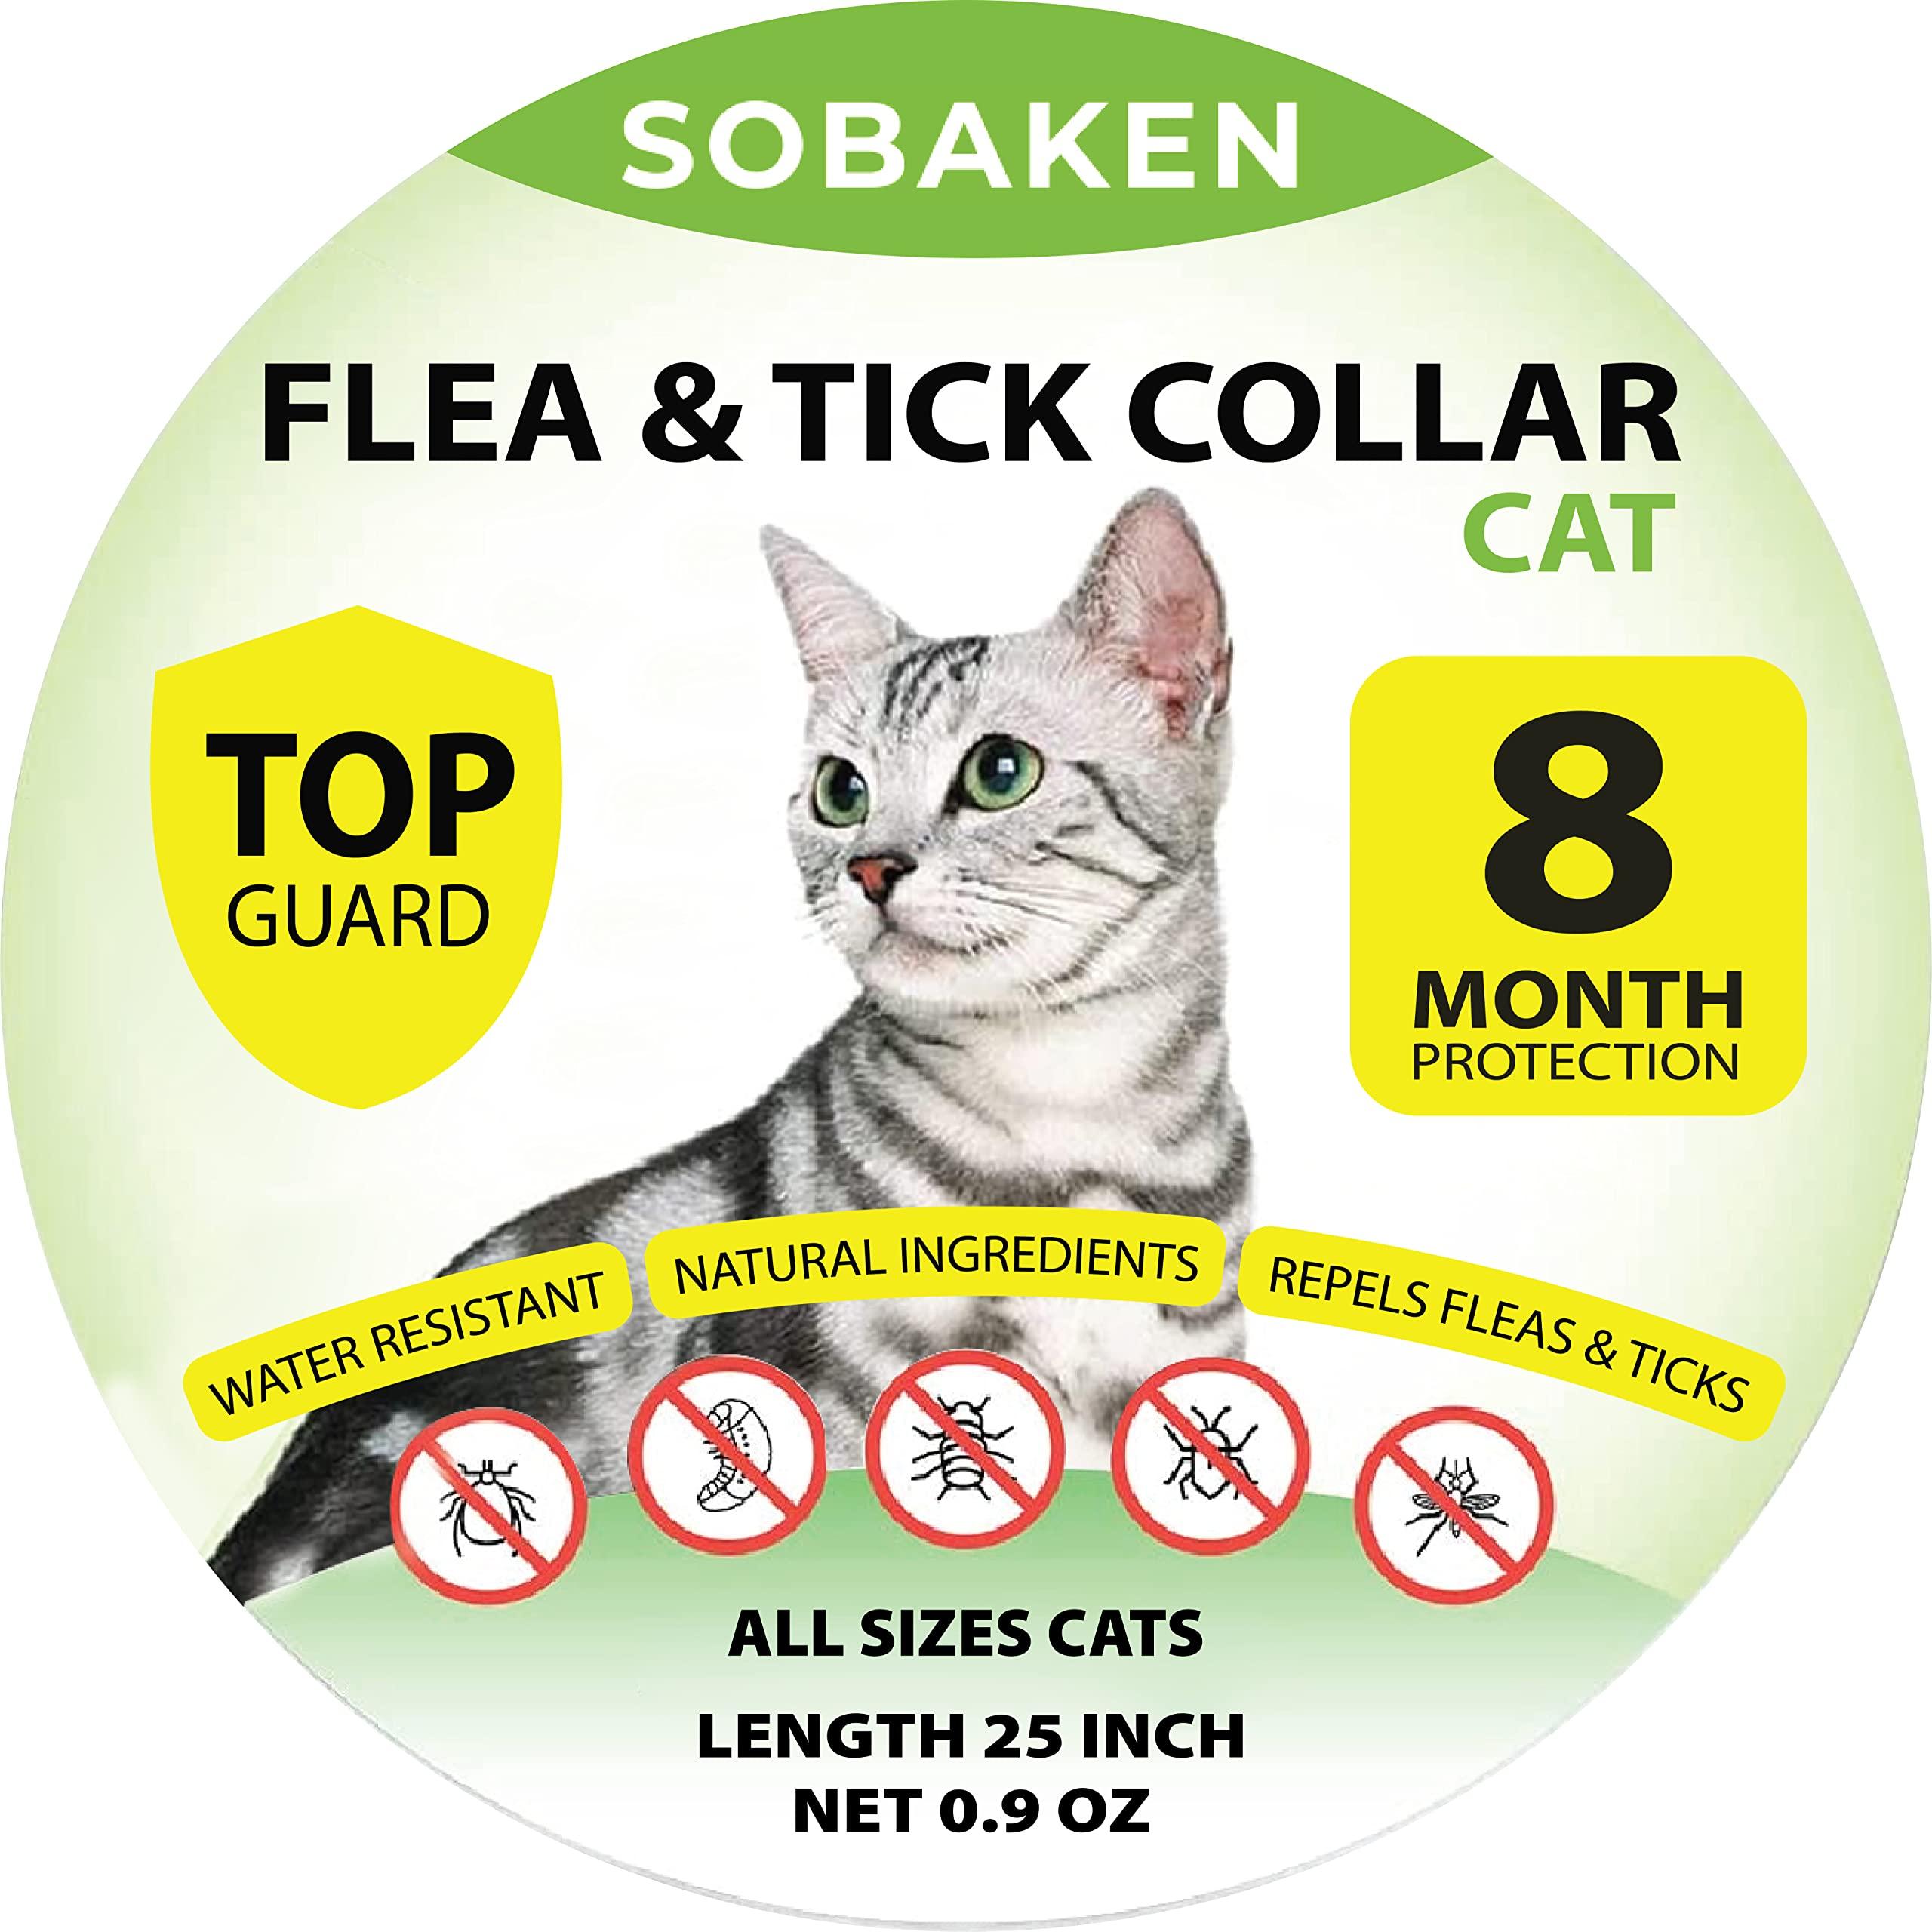 SOBAKEN Flea collar for cats, Flea and Tick Prevention for cats, Natural cat Flea collar, One Size Fits All, 13 inch 8 Month Protection - 1 Pack